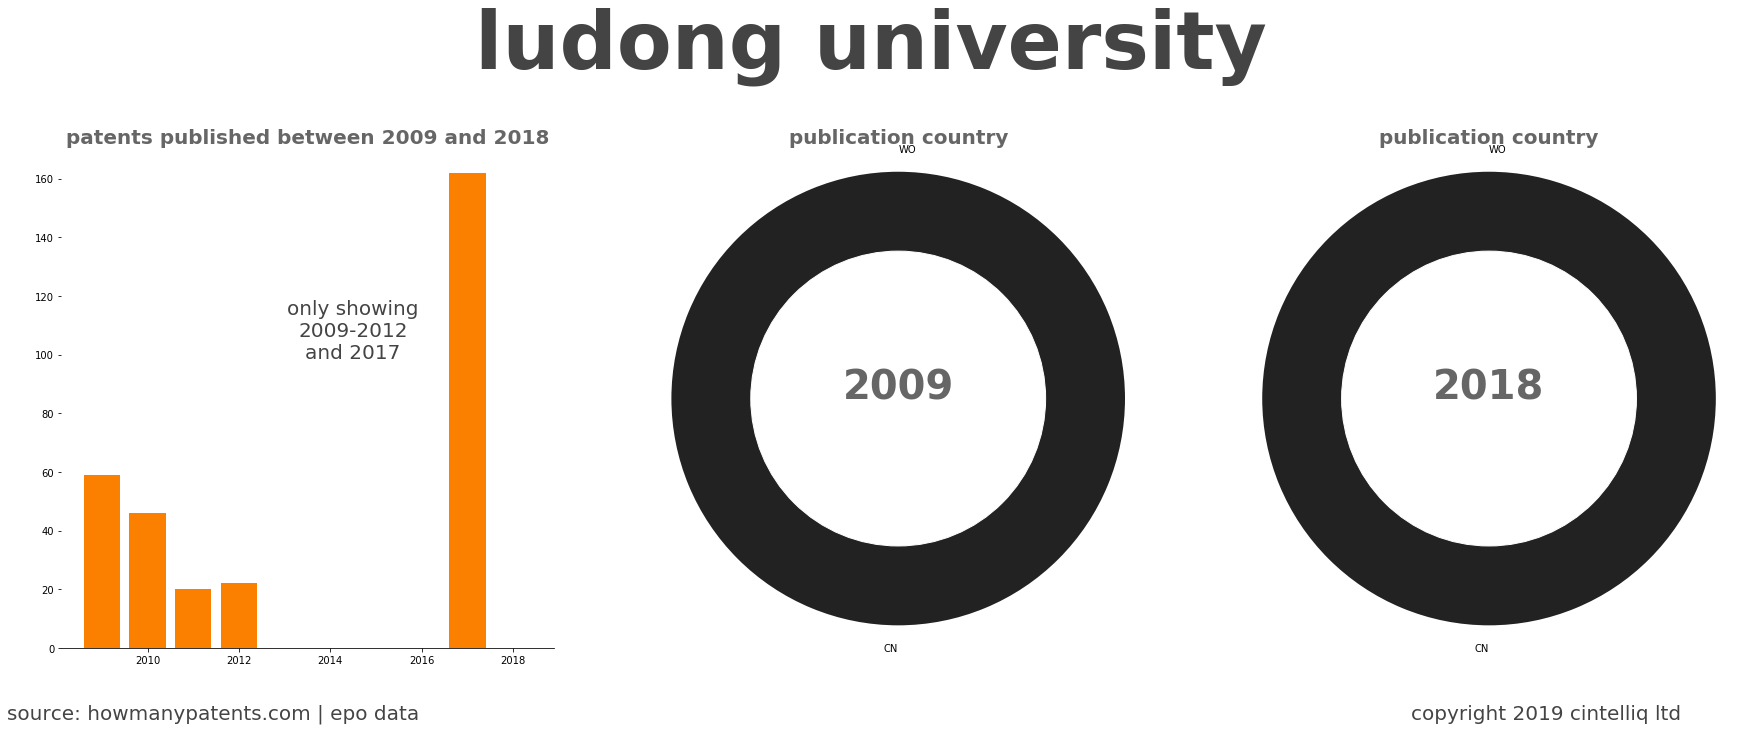 summary of patents for Ludong University